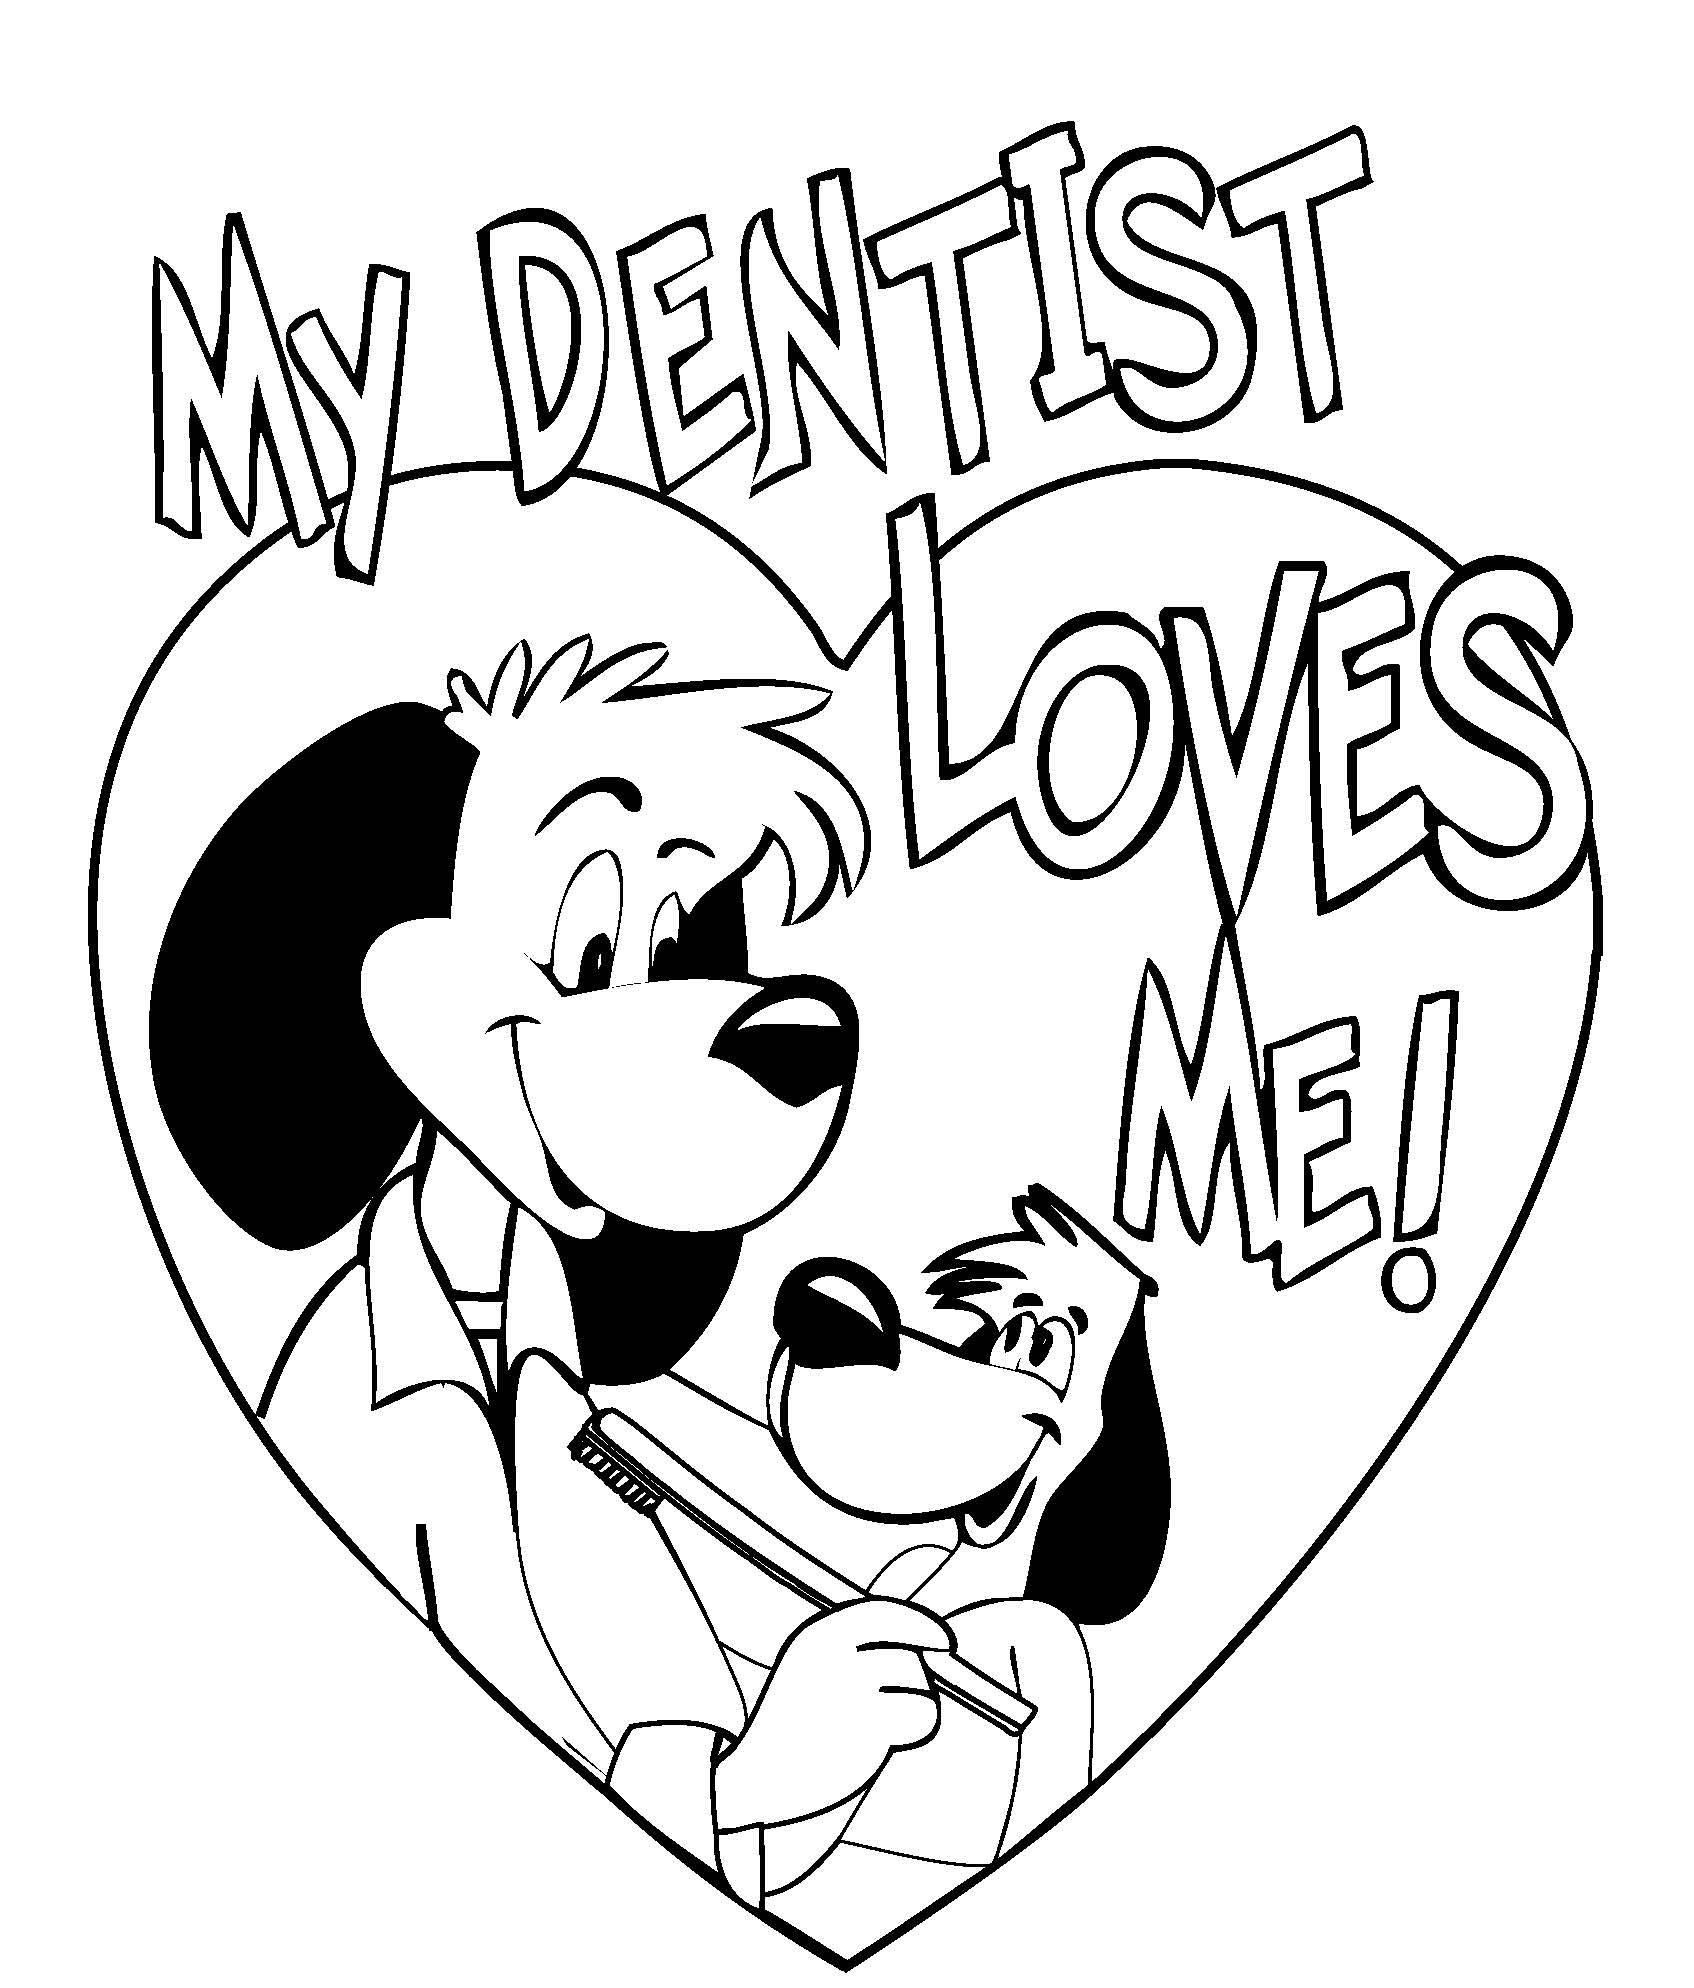 Kids Dental Coloring Pages
 Some really cute Dental Coloring Pages